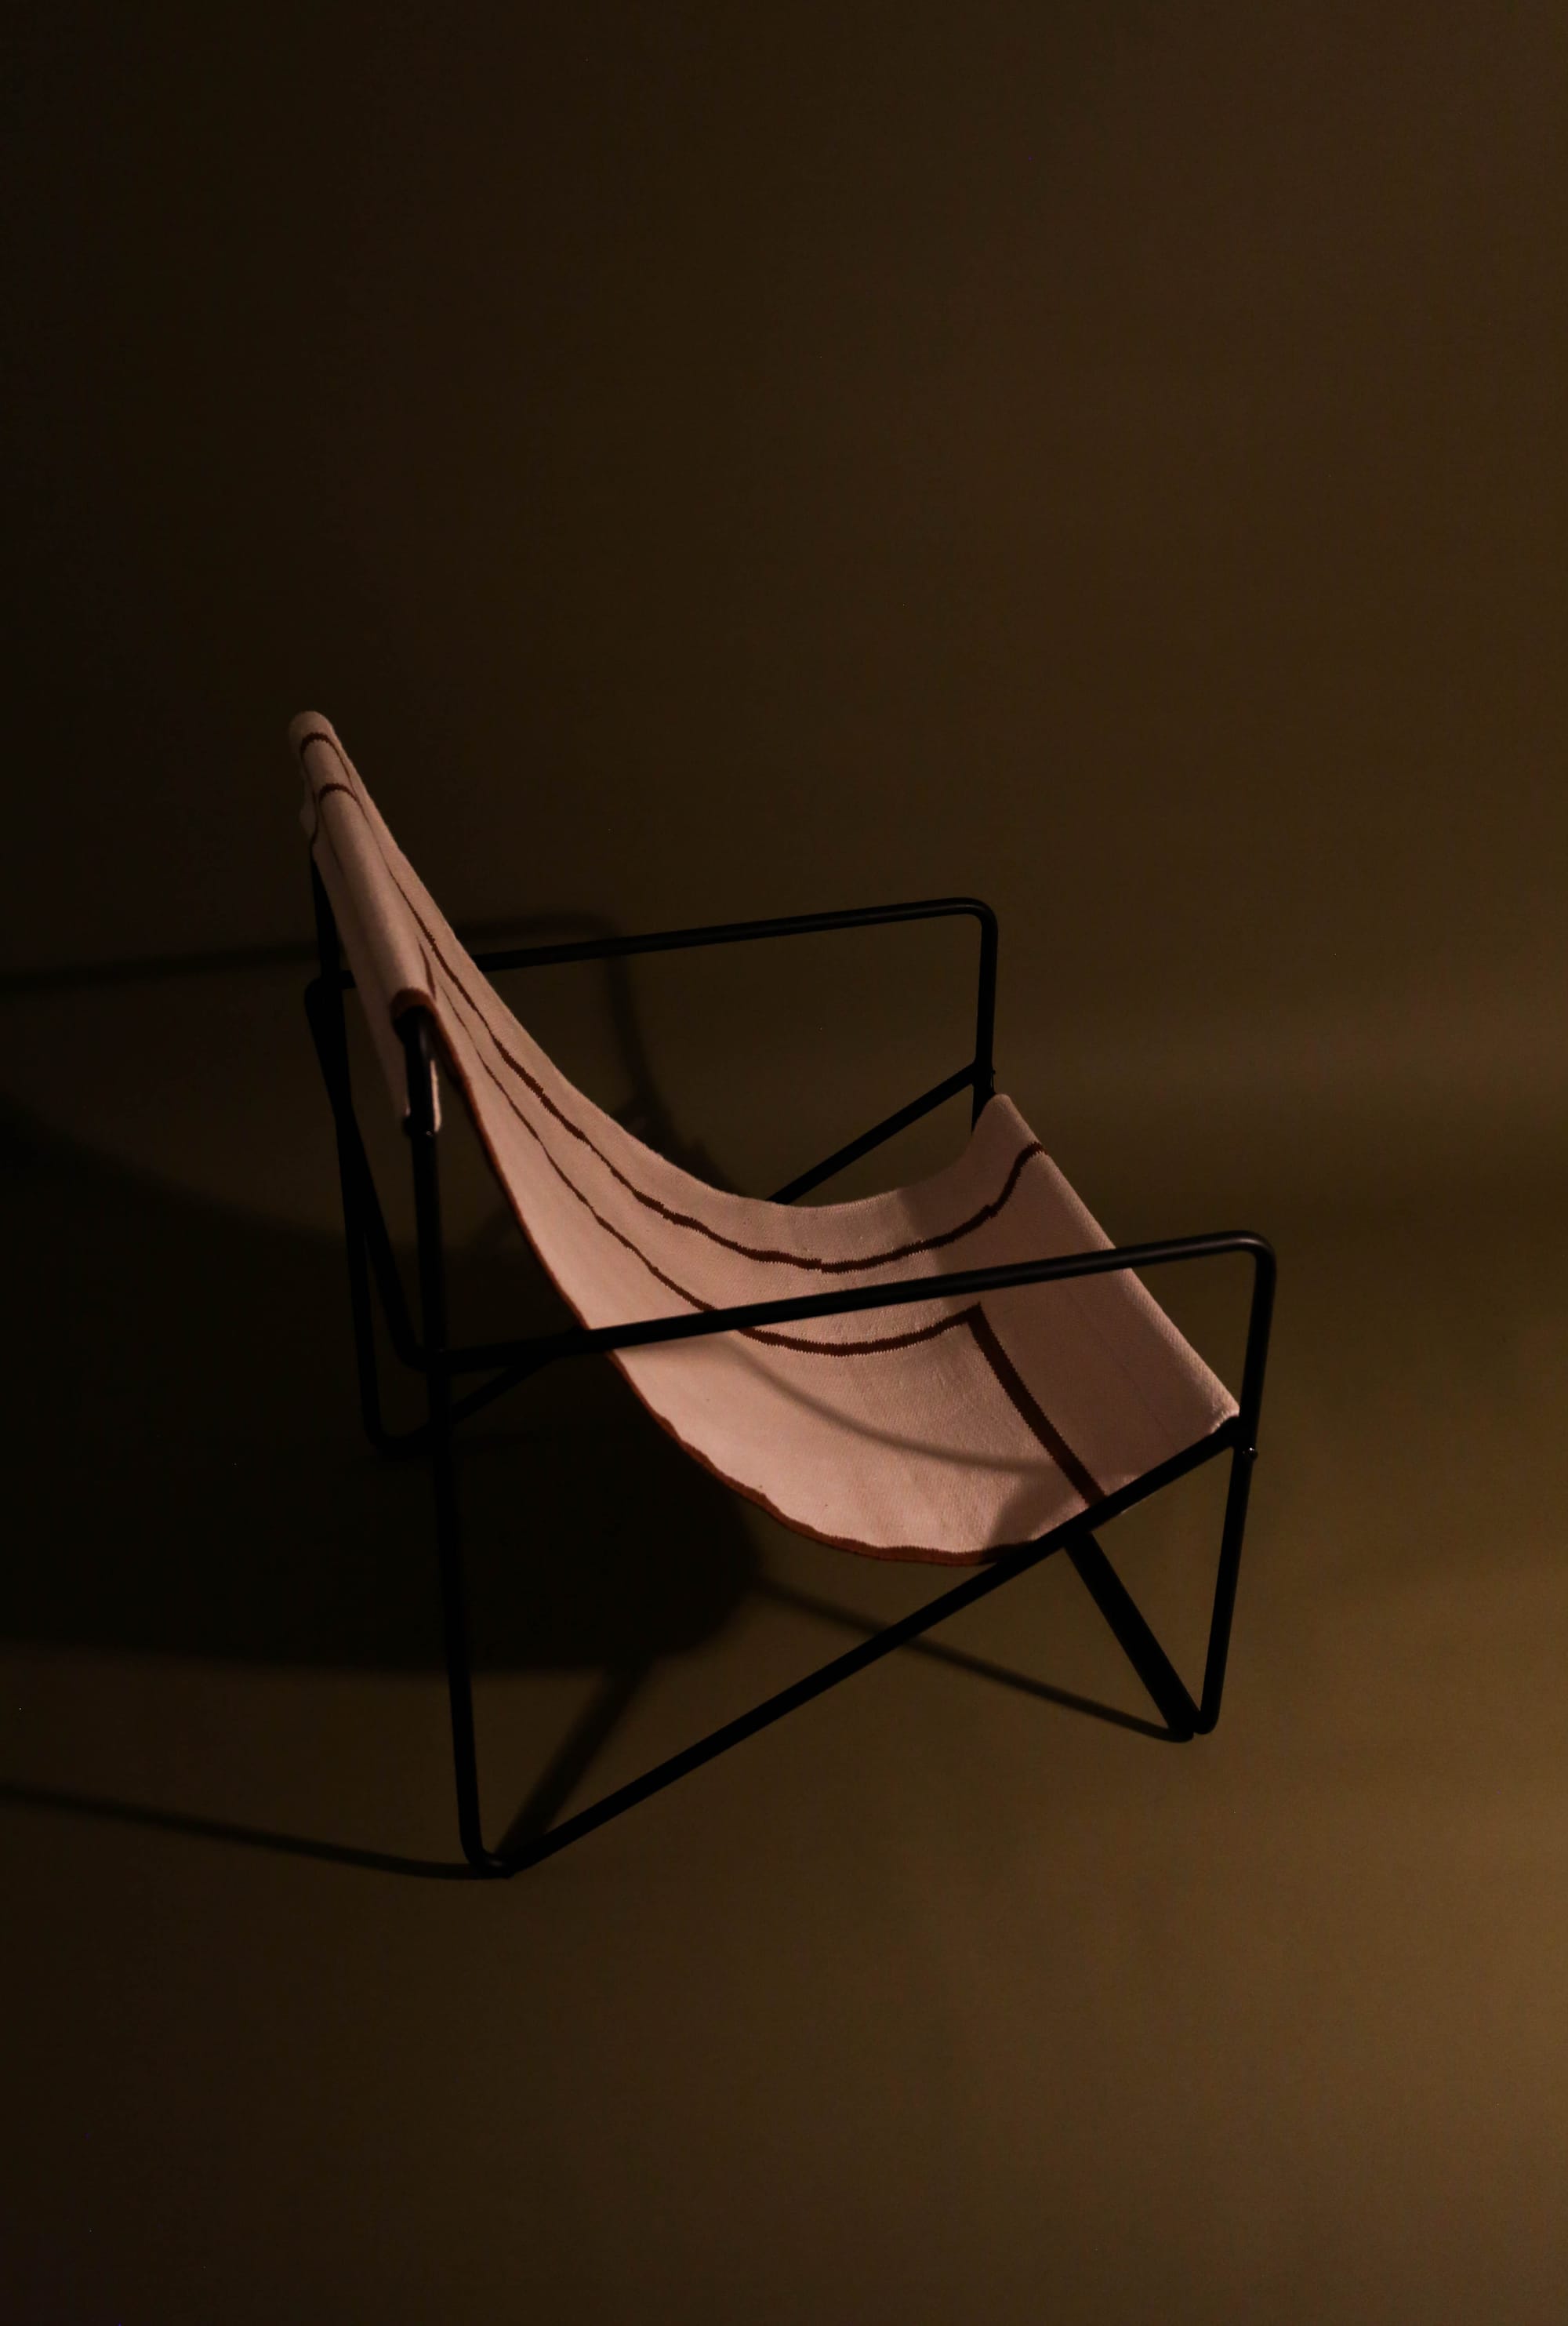 Designstuff showing a styled shot of one of their occasional chairs that they stock